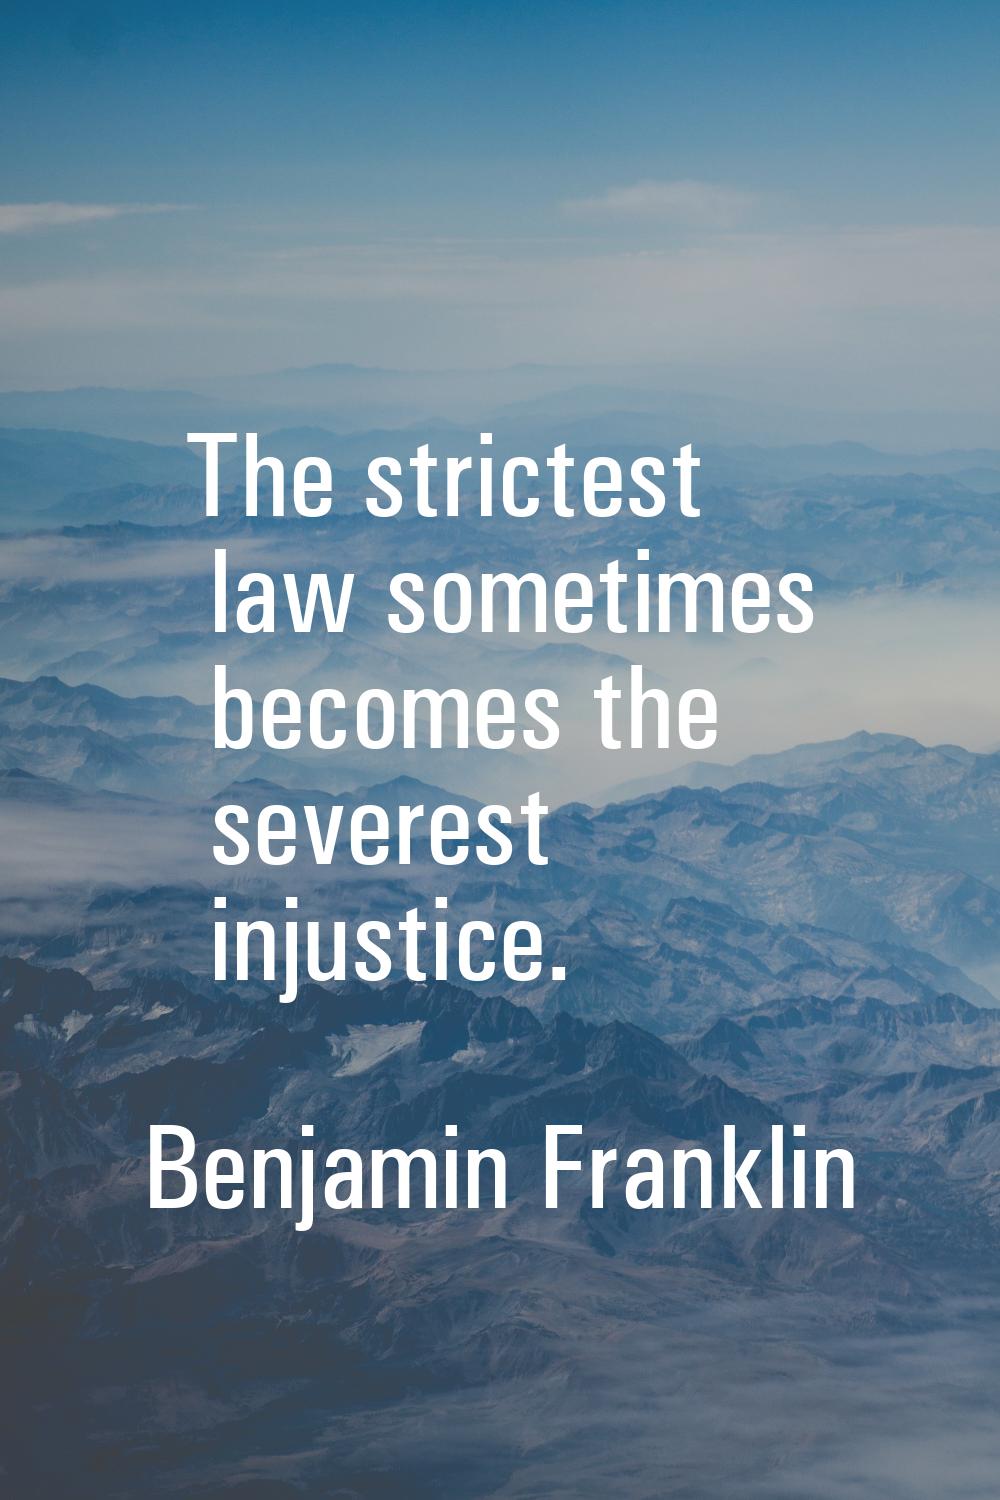 The strictest law sometimes becomes the severest injustice.